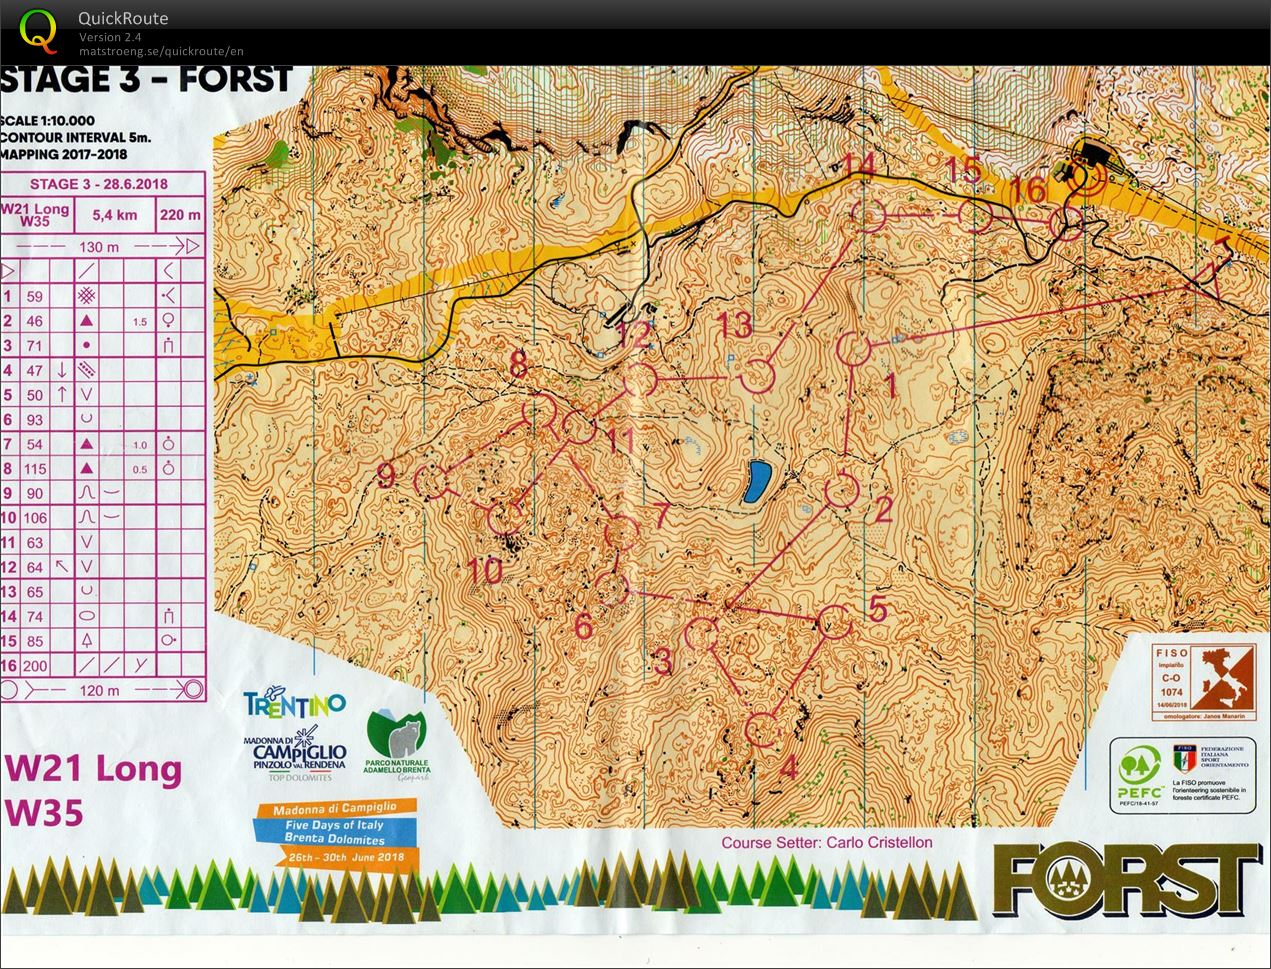 5D of Italy - stage 3 - long - D21long (28/06/2018)